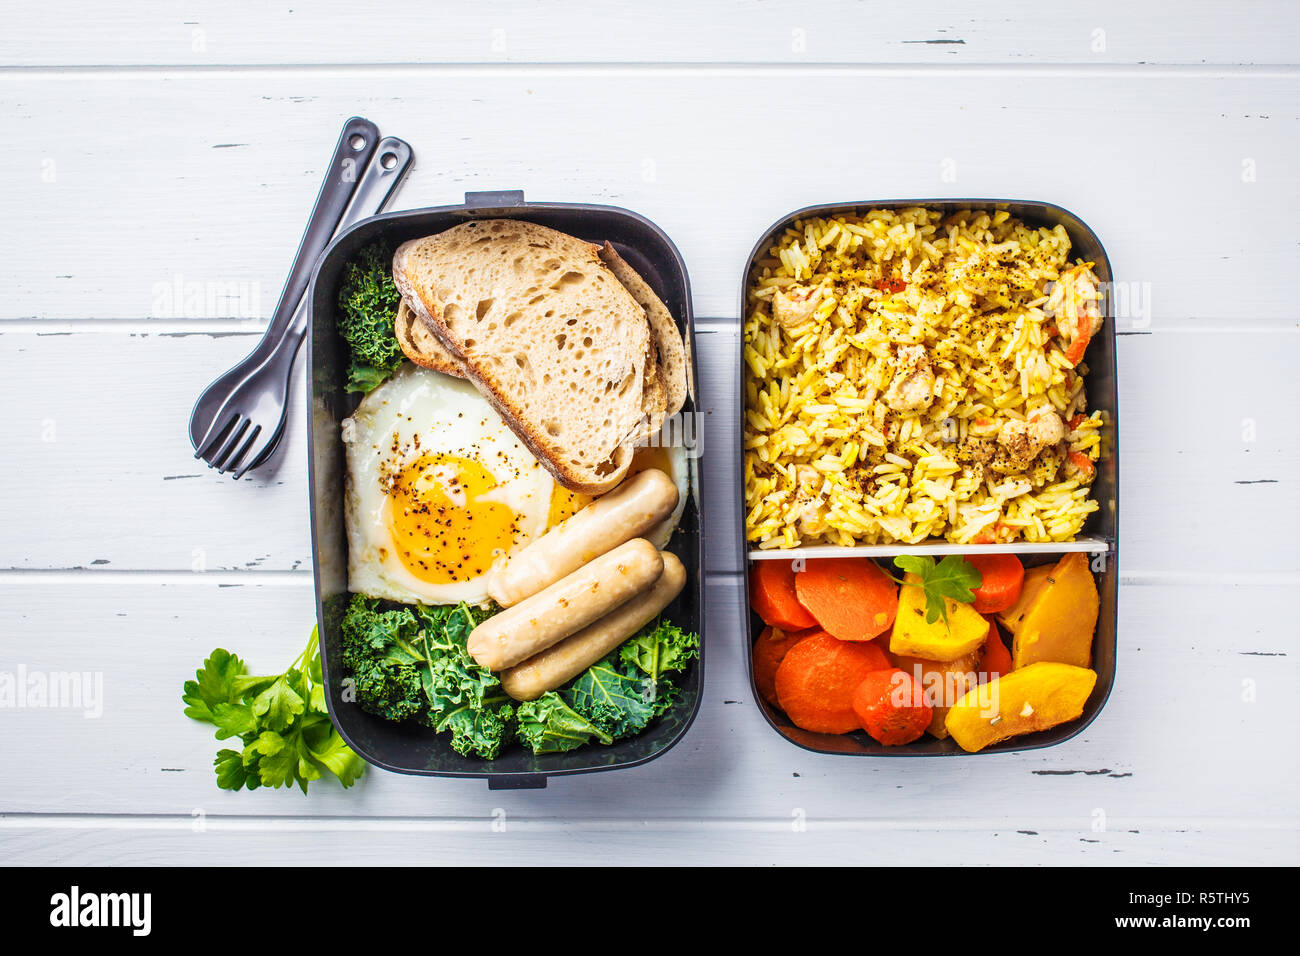 https://c8.alamy.com/comp/R5THY5/meal-prep-containers-with-rice-with-chicken-baked-vegetables-eggs-sausages-and-salad-for-breakfast-and-lunch-overhead-shot-copy-space-wtite-woode-R5THY5.jpg